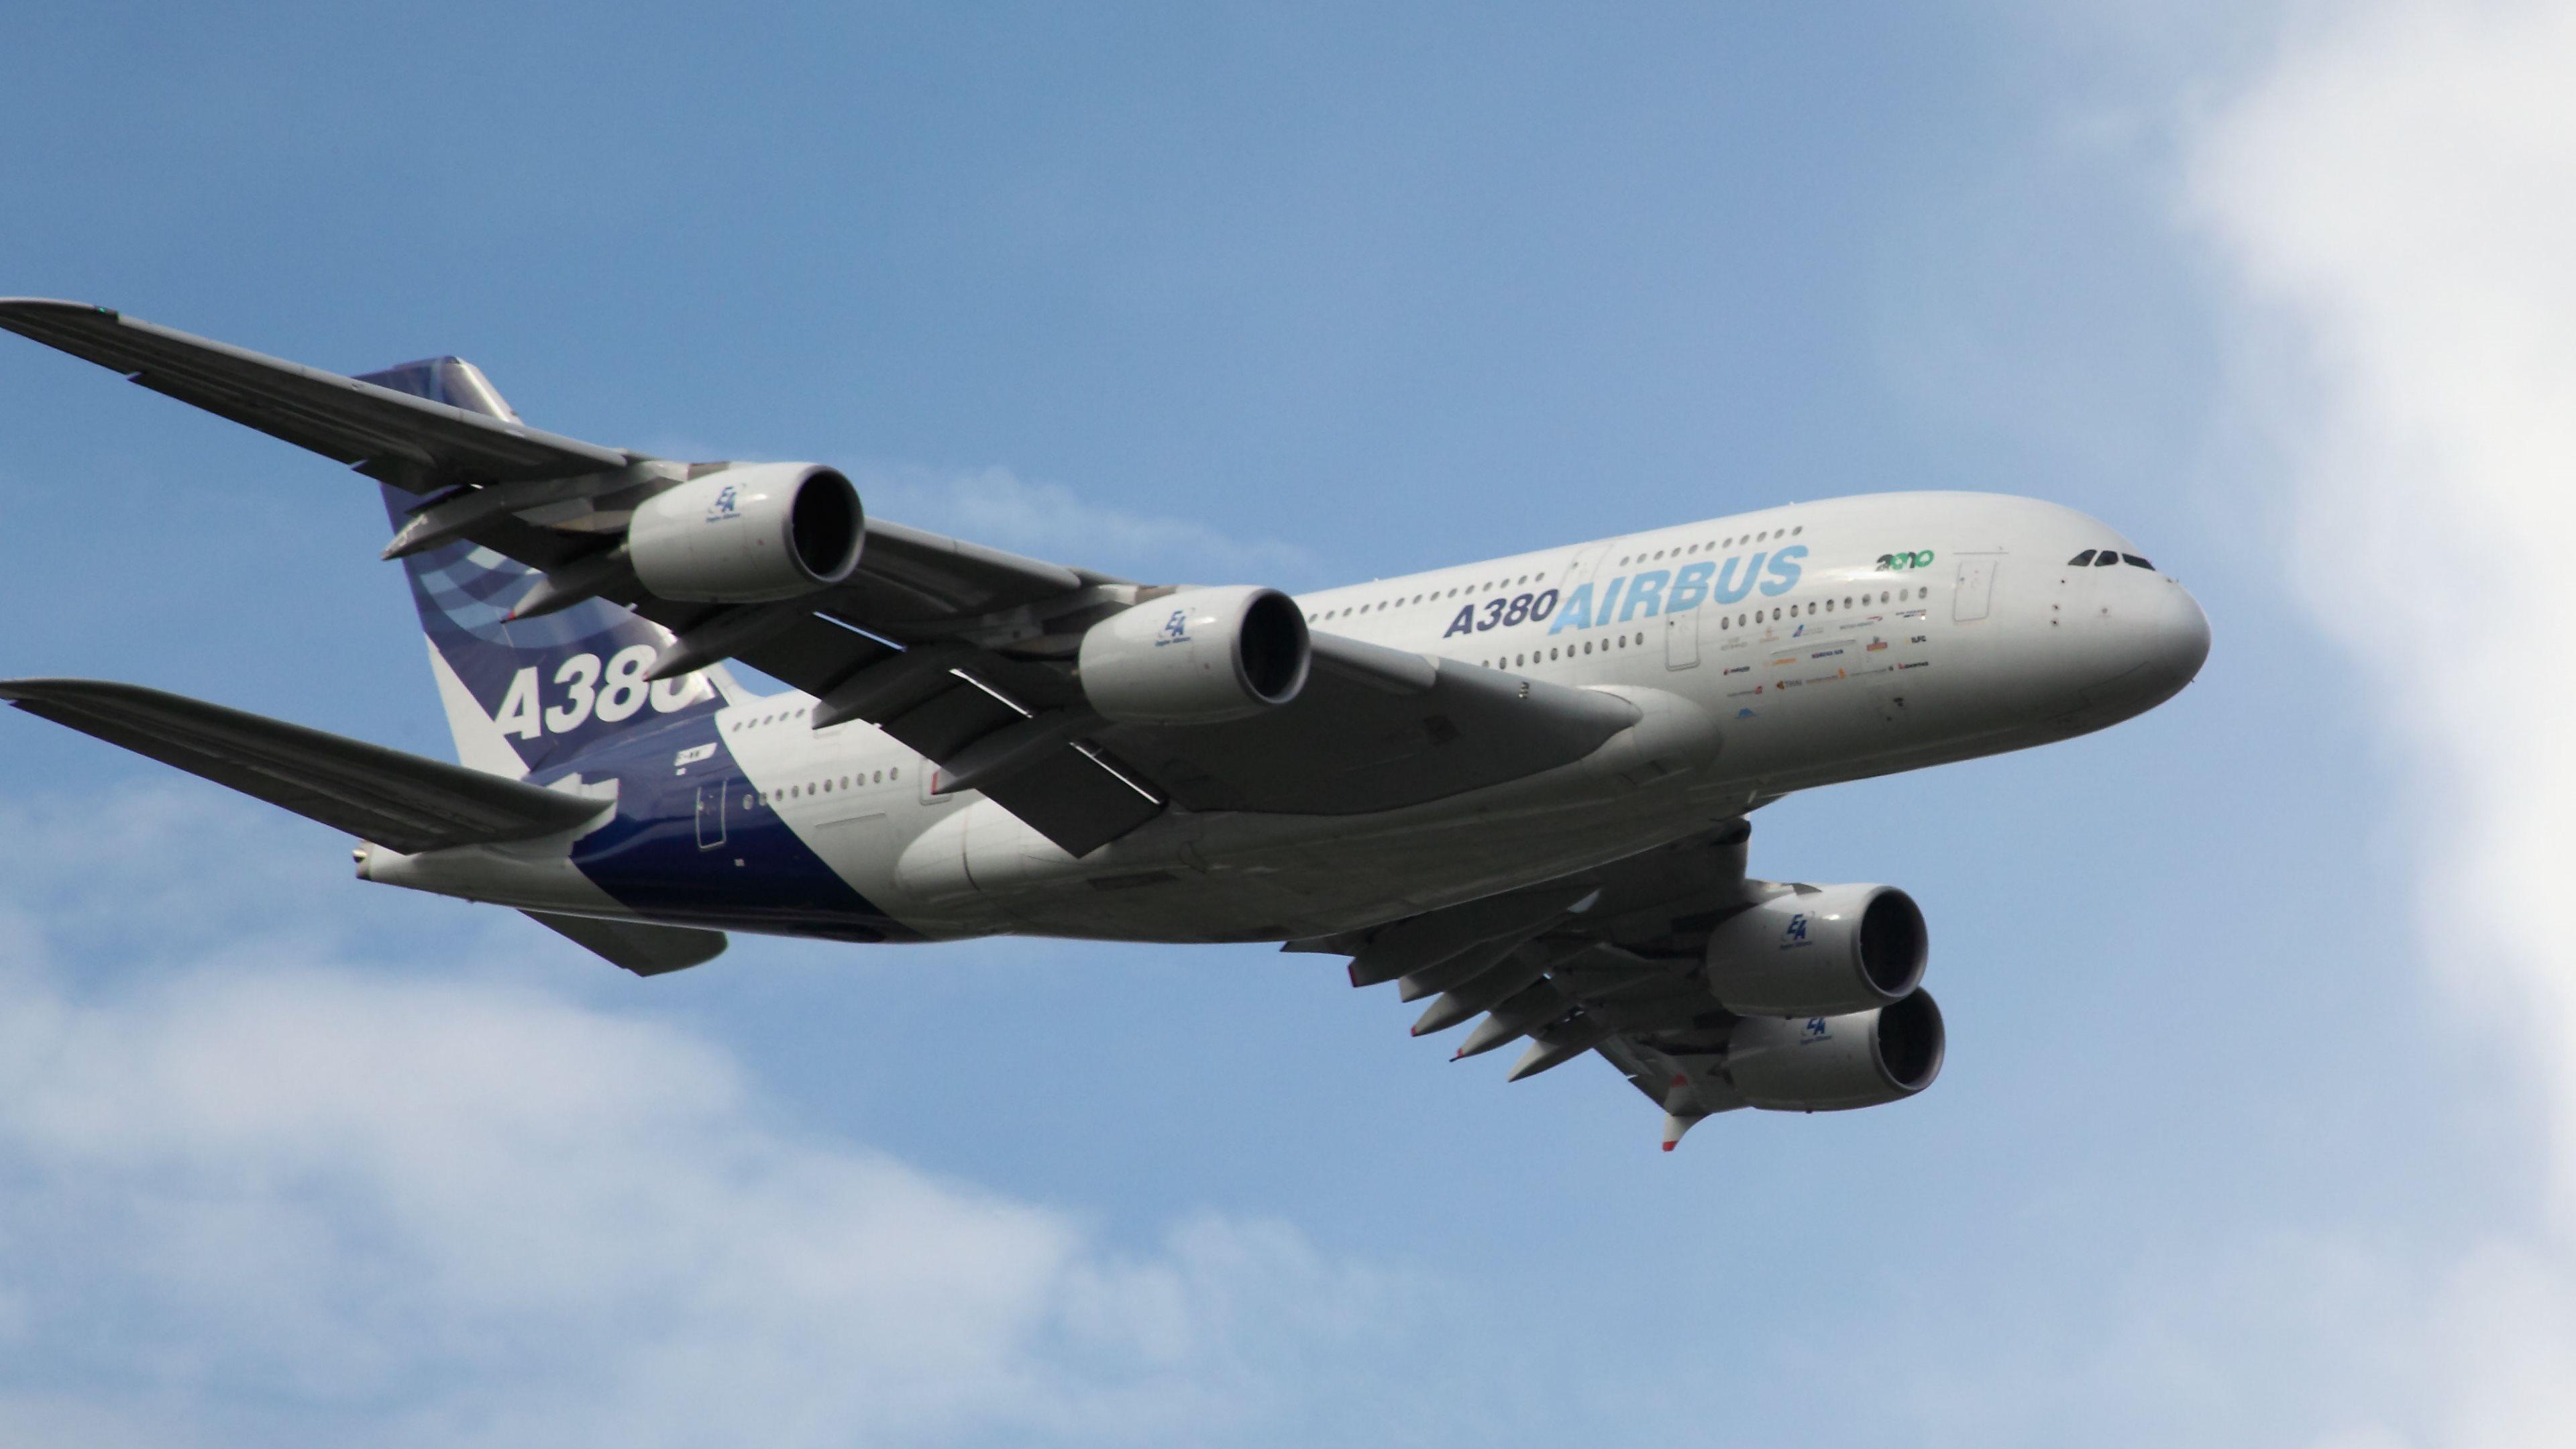 Airbus A380 Wallpapers - Wallpaper Cave